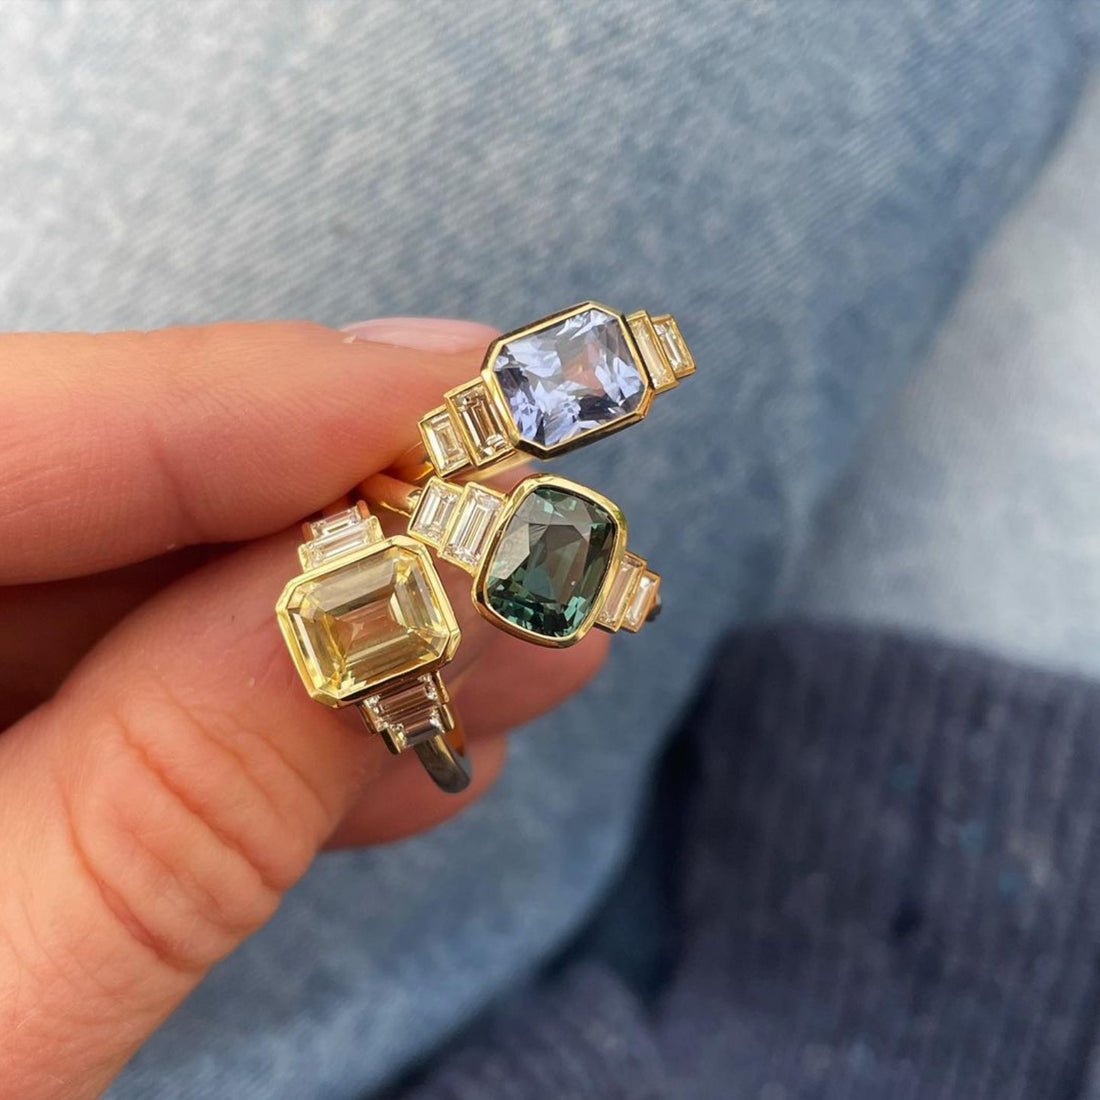  Natural Lemon Yellow Sapphire and Diamond Ring by Gee Woods | The Cut London